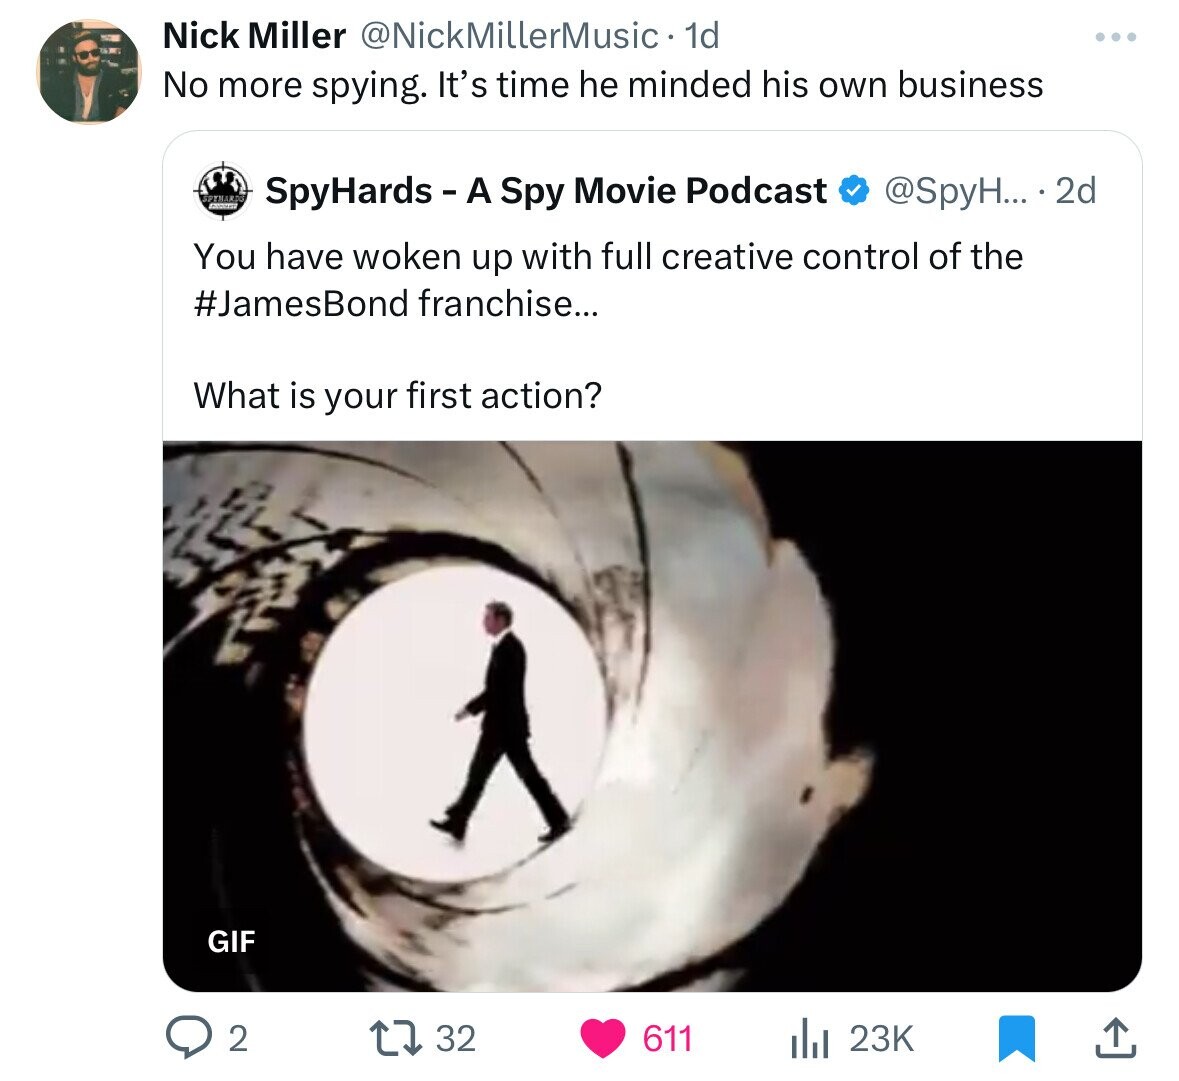 sean connery gun barrel gif - Nick Miller . 1d No more spying. It's time he minded his own business Pymar SpyHards A Spy Movie Podcast ... 2d You have woken up with full creative control of the Bond franchise... What is your first action? Gif 2 17 32 611 